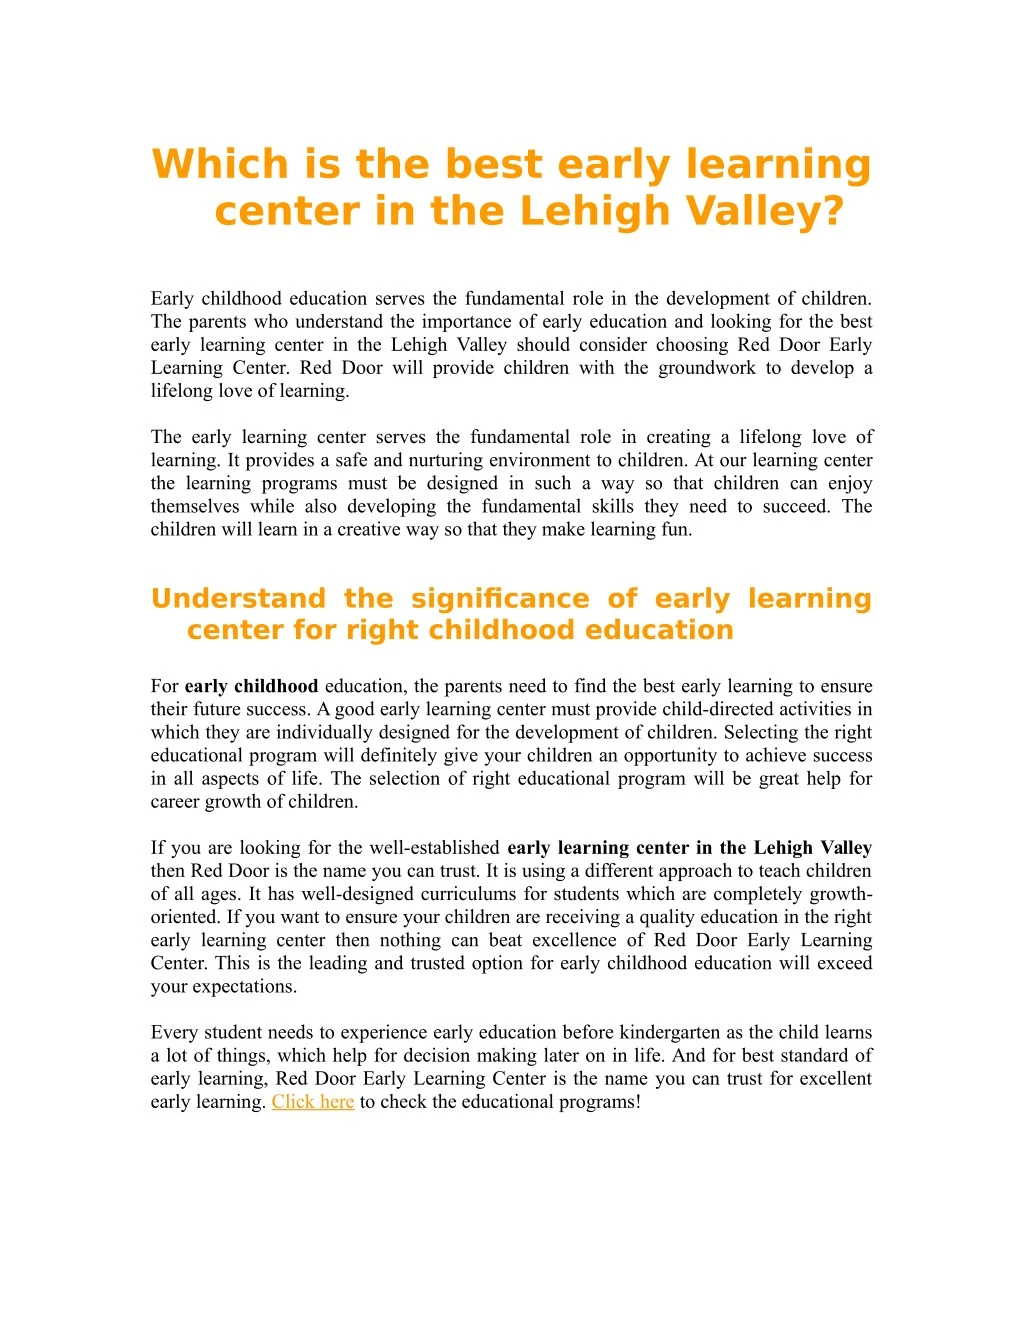 which is the best early learning center